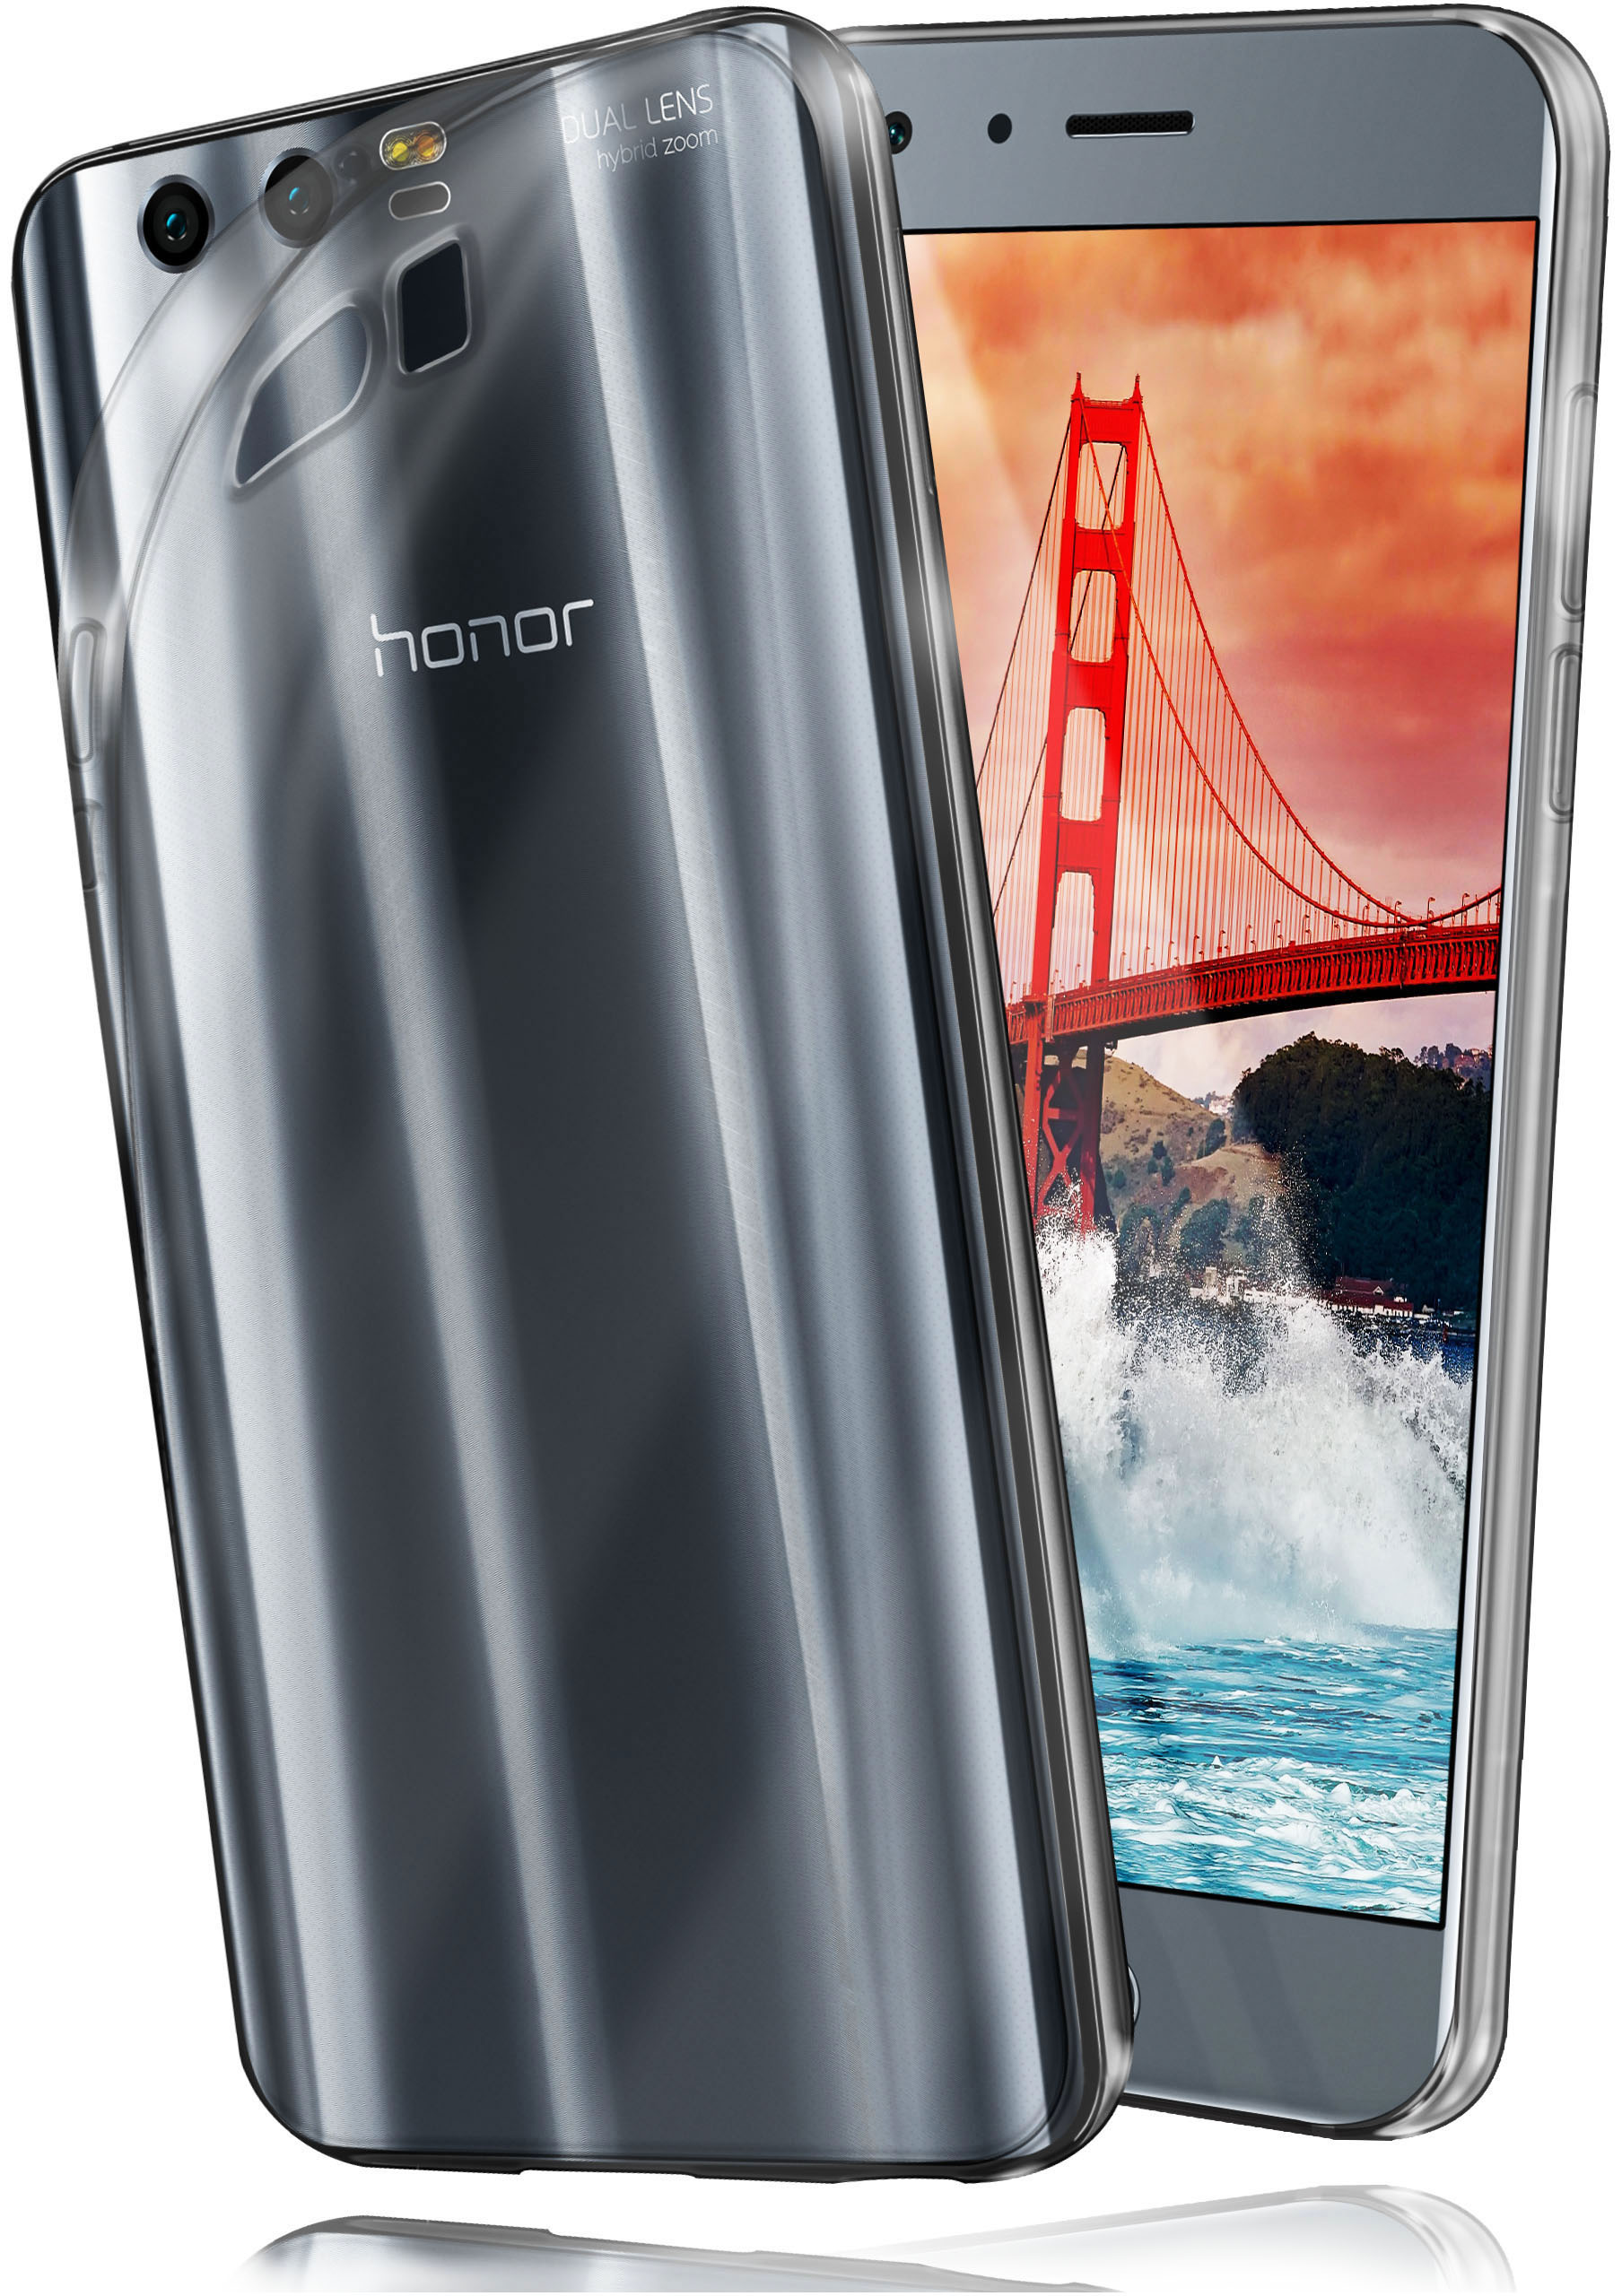 Backcover, Huawei, Crystal-Clear Honor Case, MOEX Aero 9,